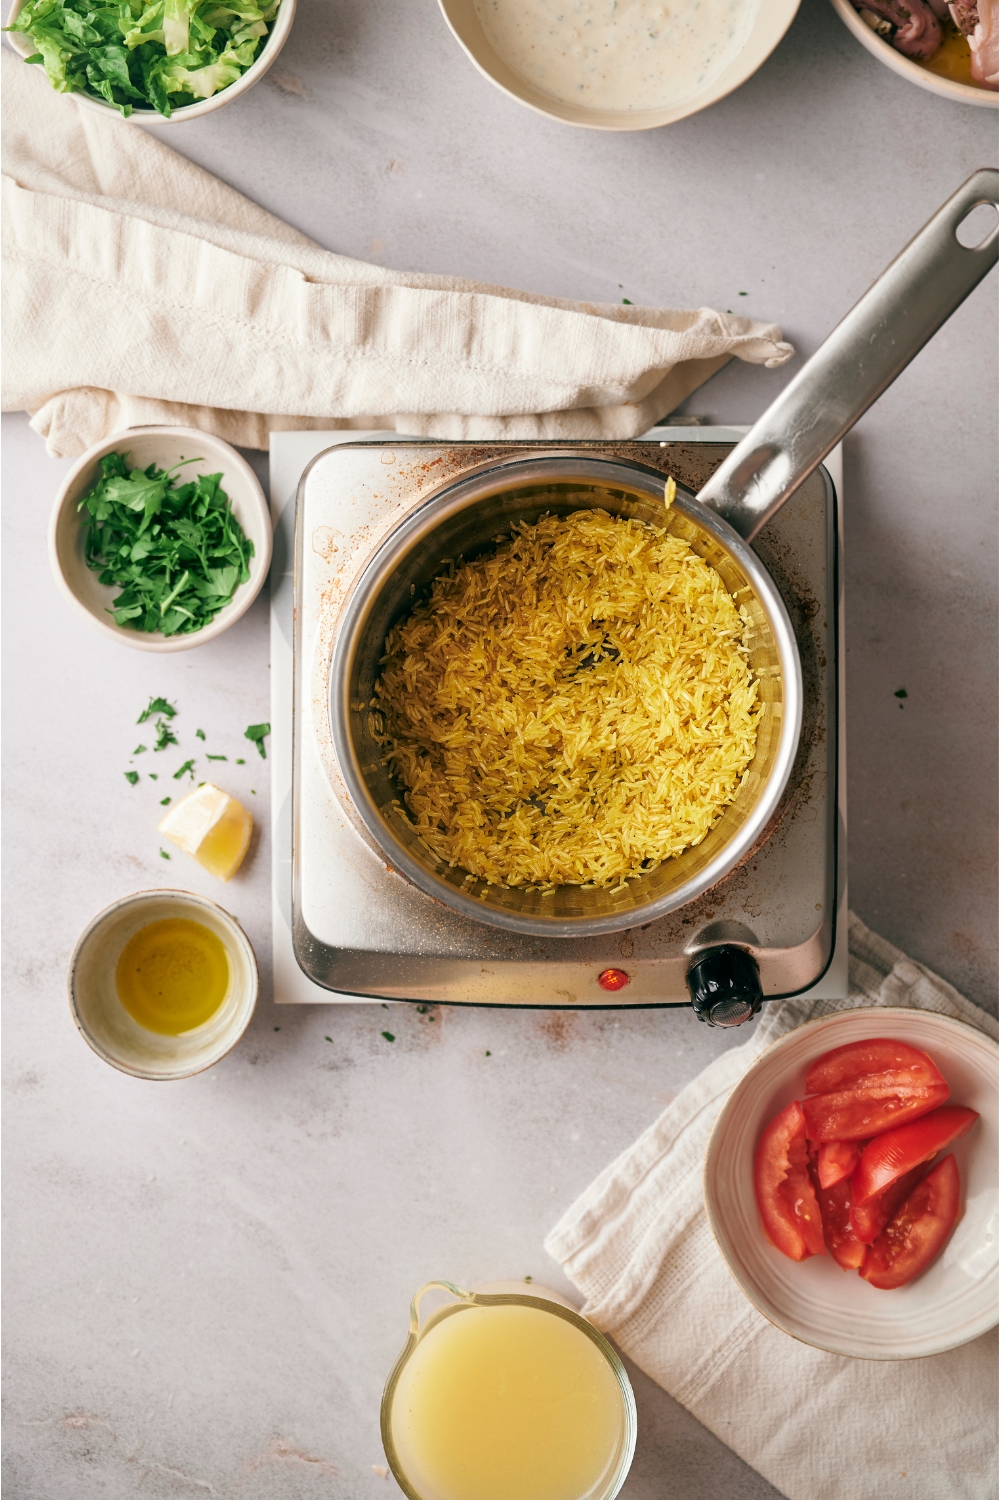 A saucepan over an electric burner. The saucepan is filled with yellow rice and is surrounded by an assortment of ingredients including tomato wedges, broth, butter, and parsley.